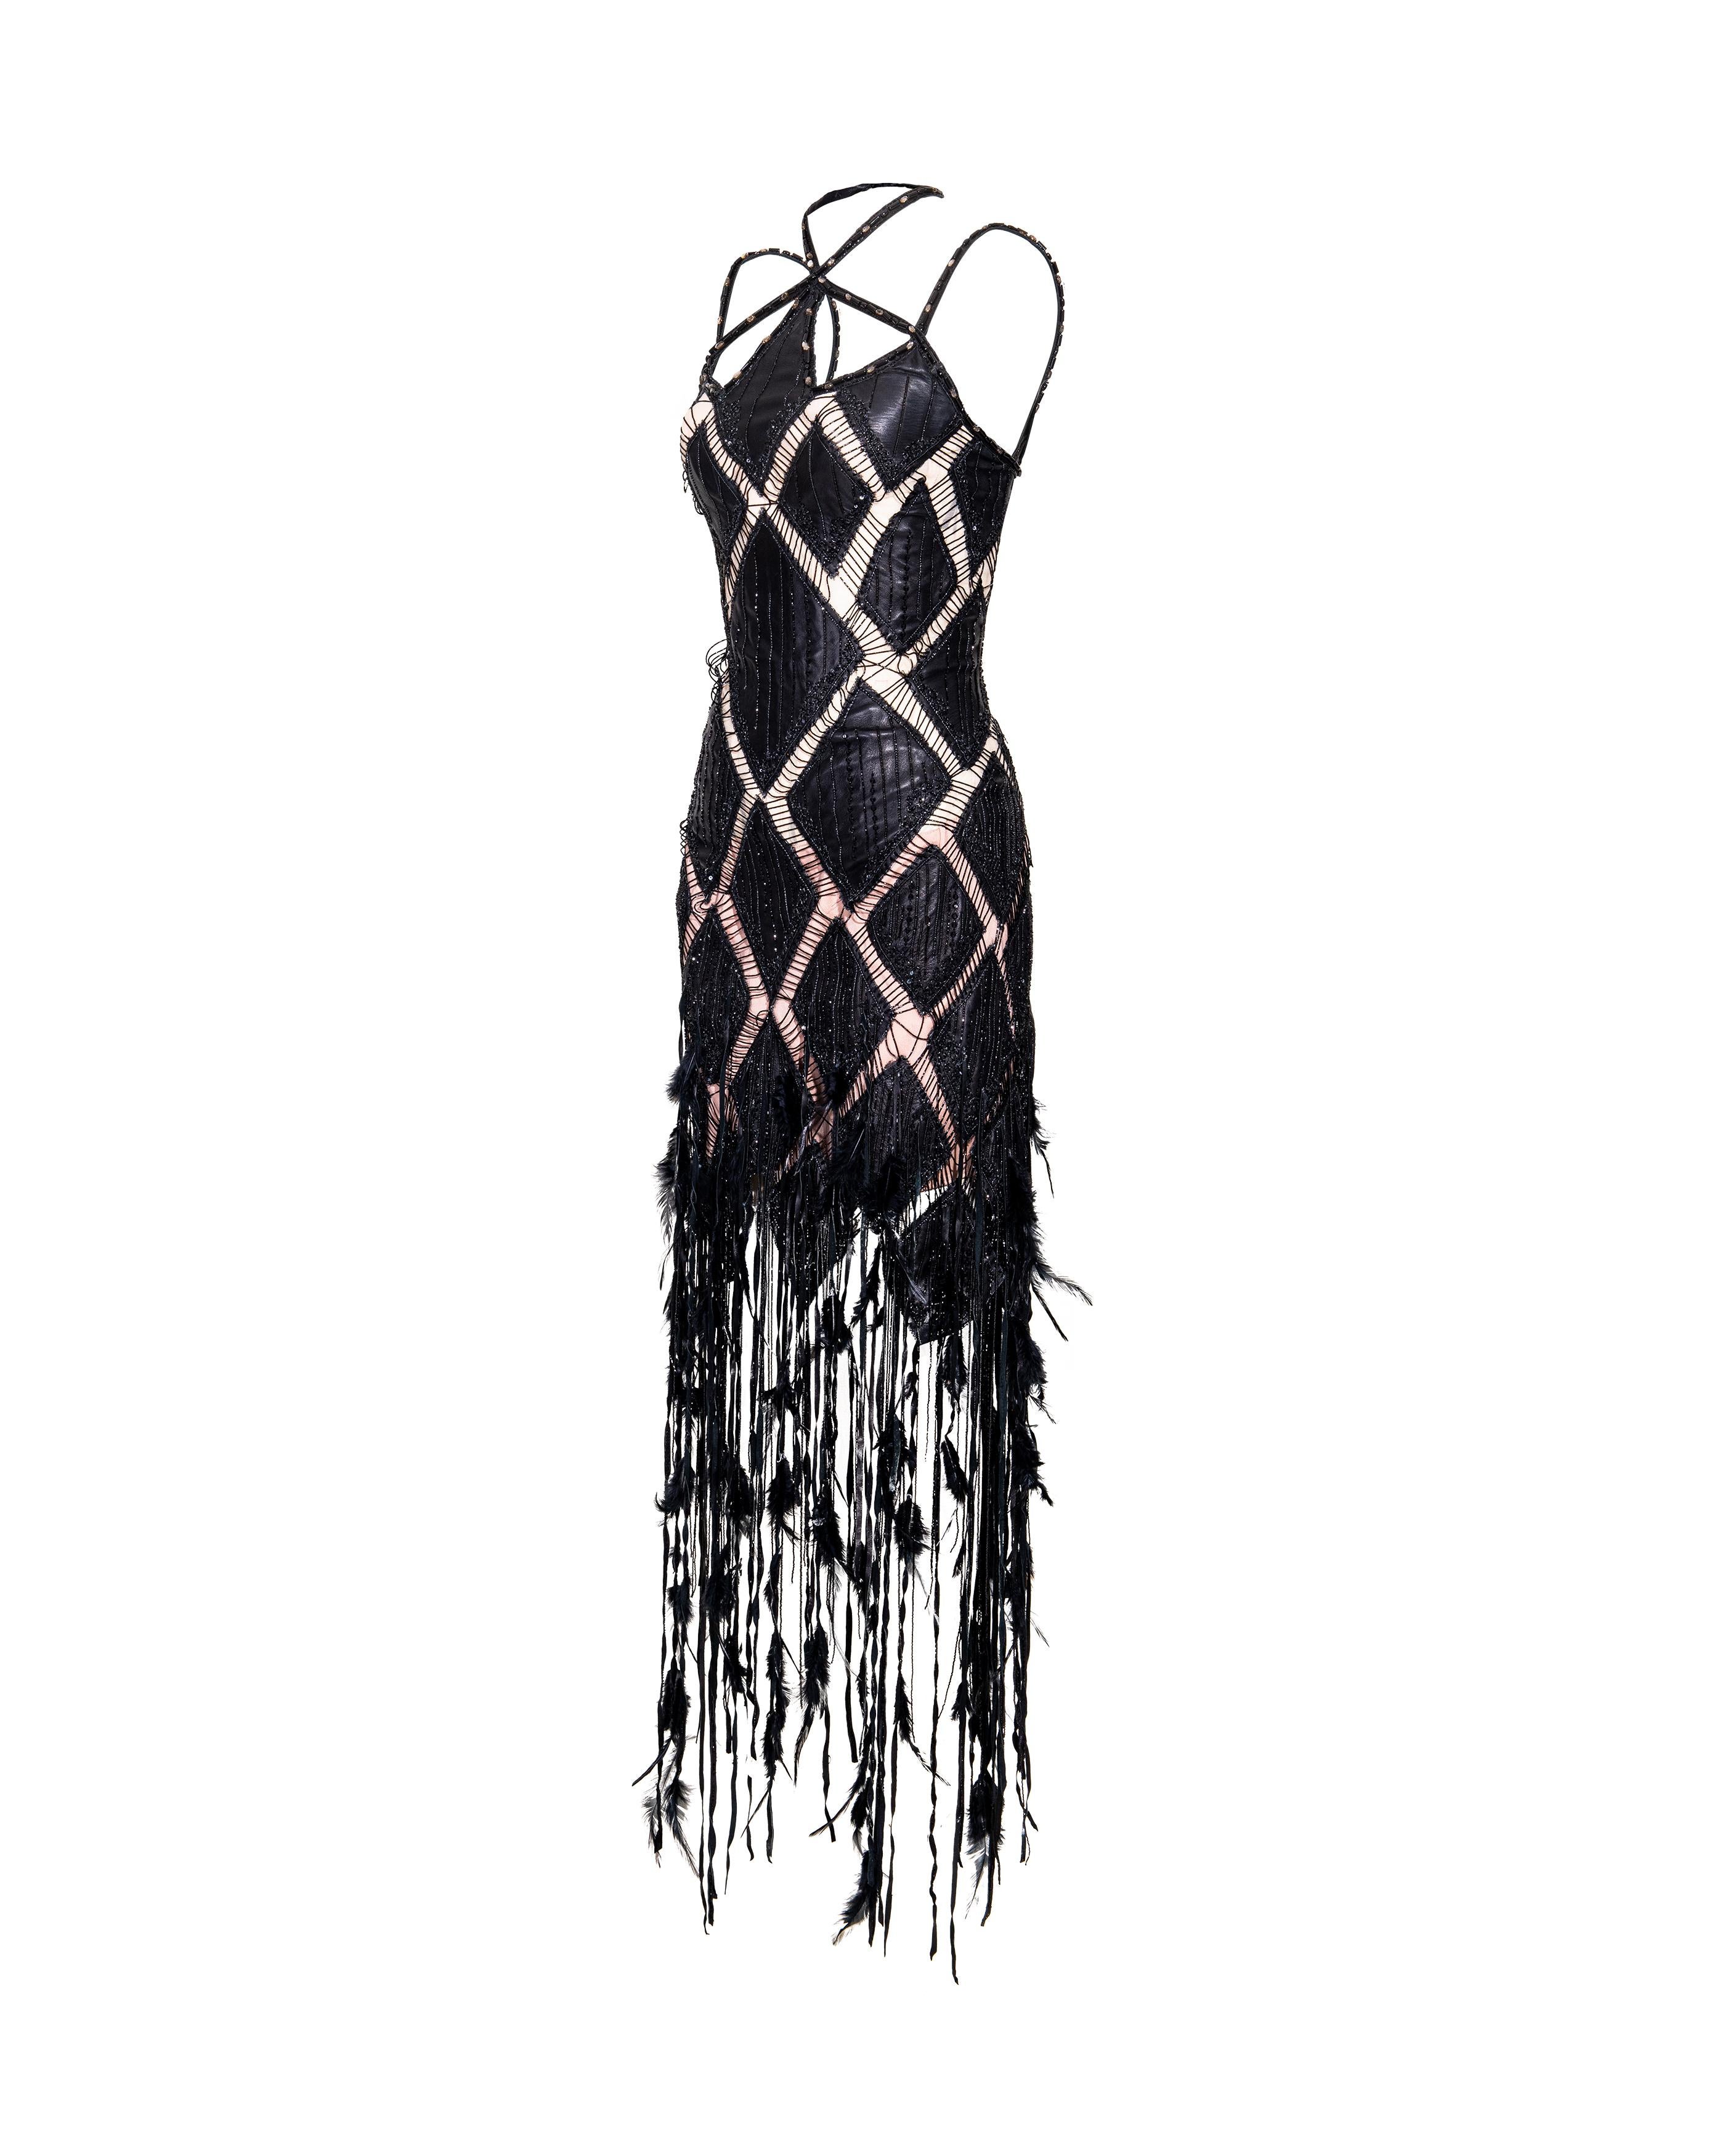 S/S 2004 Roberto Cavalli Geometric Black Embellished Leather Corset Fringe Dress In Good Condition For Sale In North Hollywood, CA